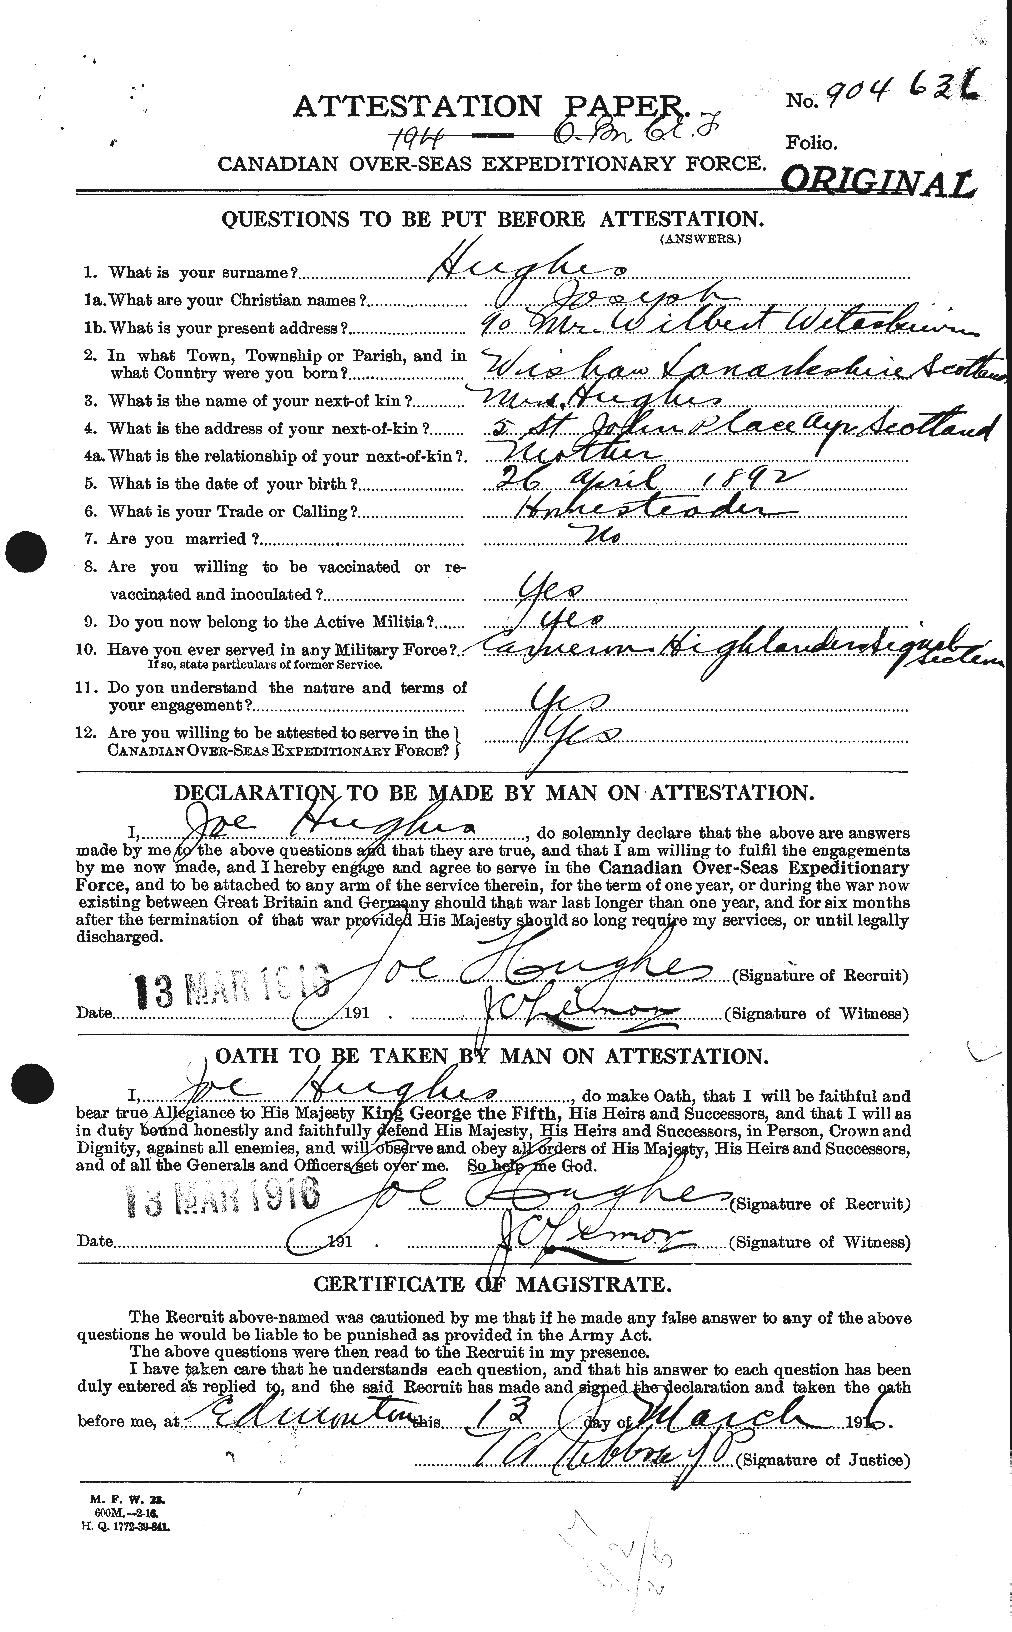 Personnel Records of the First World War - CEF 404065a